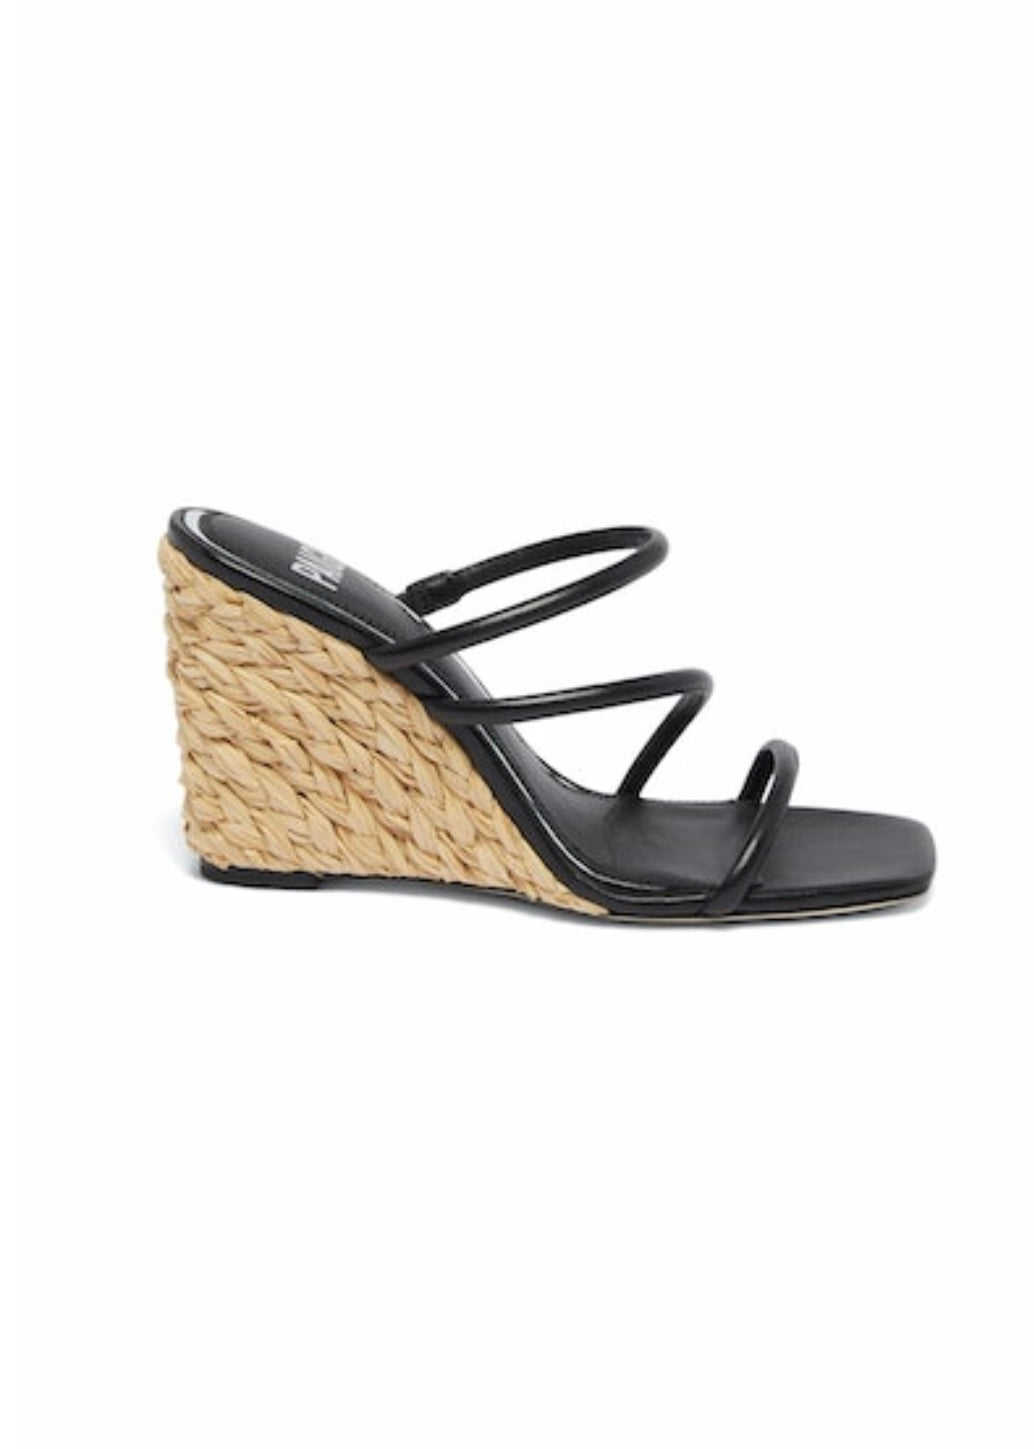 Paige Stacey Wedge in Black